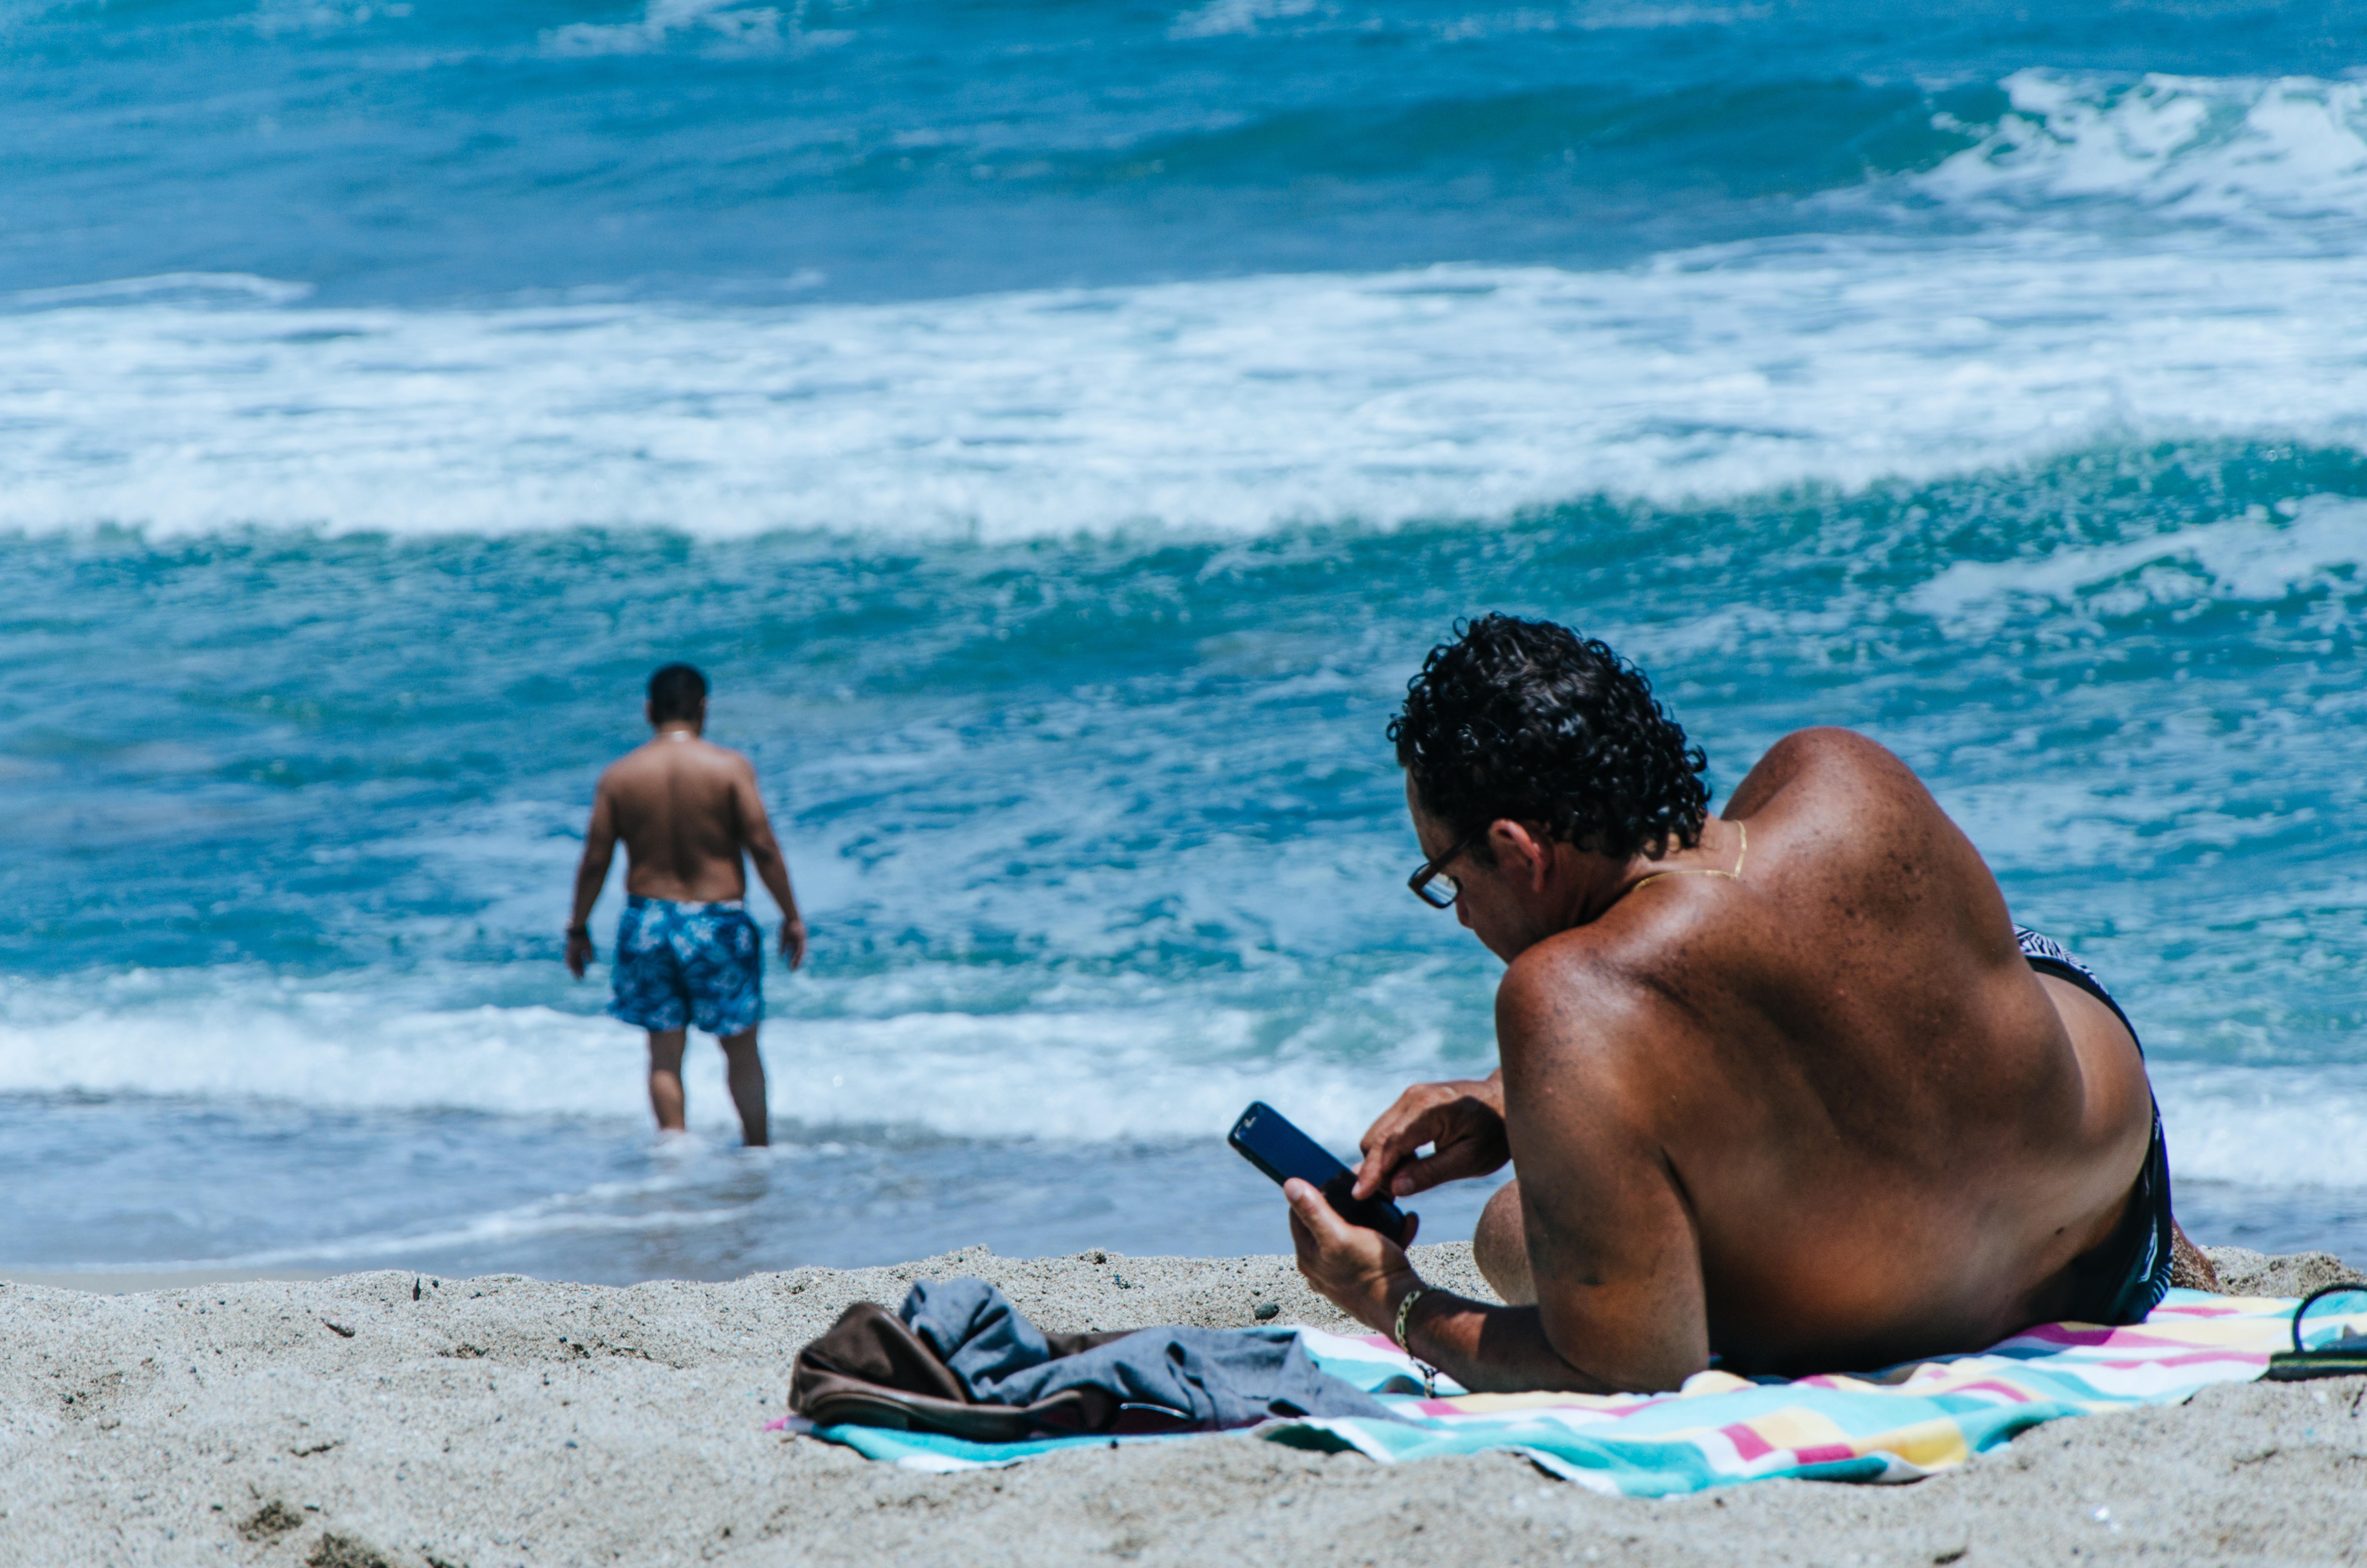 Dating apps have increasingly become an essential part of the travelling experience, connecting travellers seeking casual holiday flings. Photo: Alamy